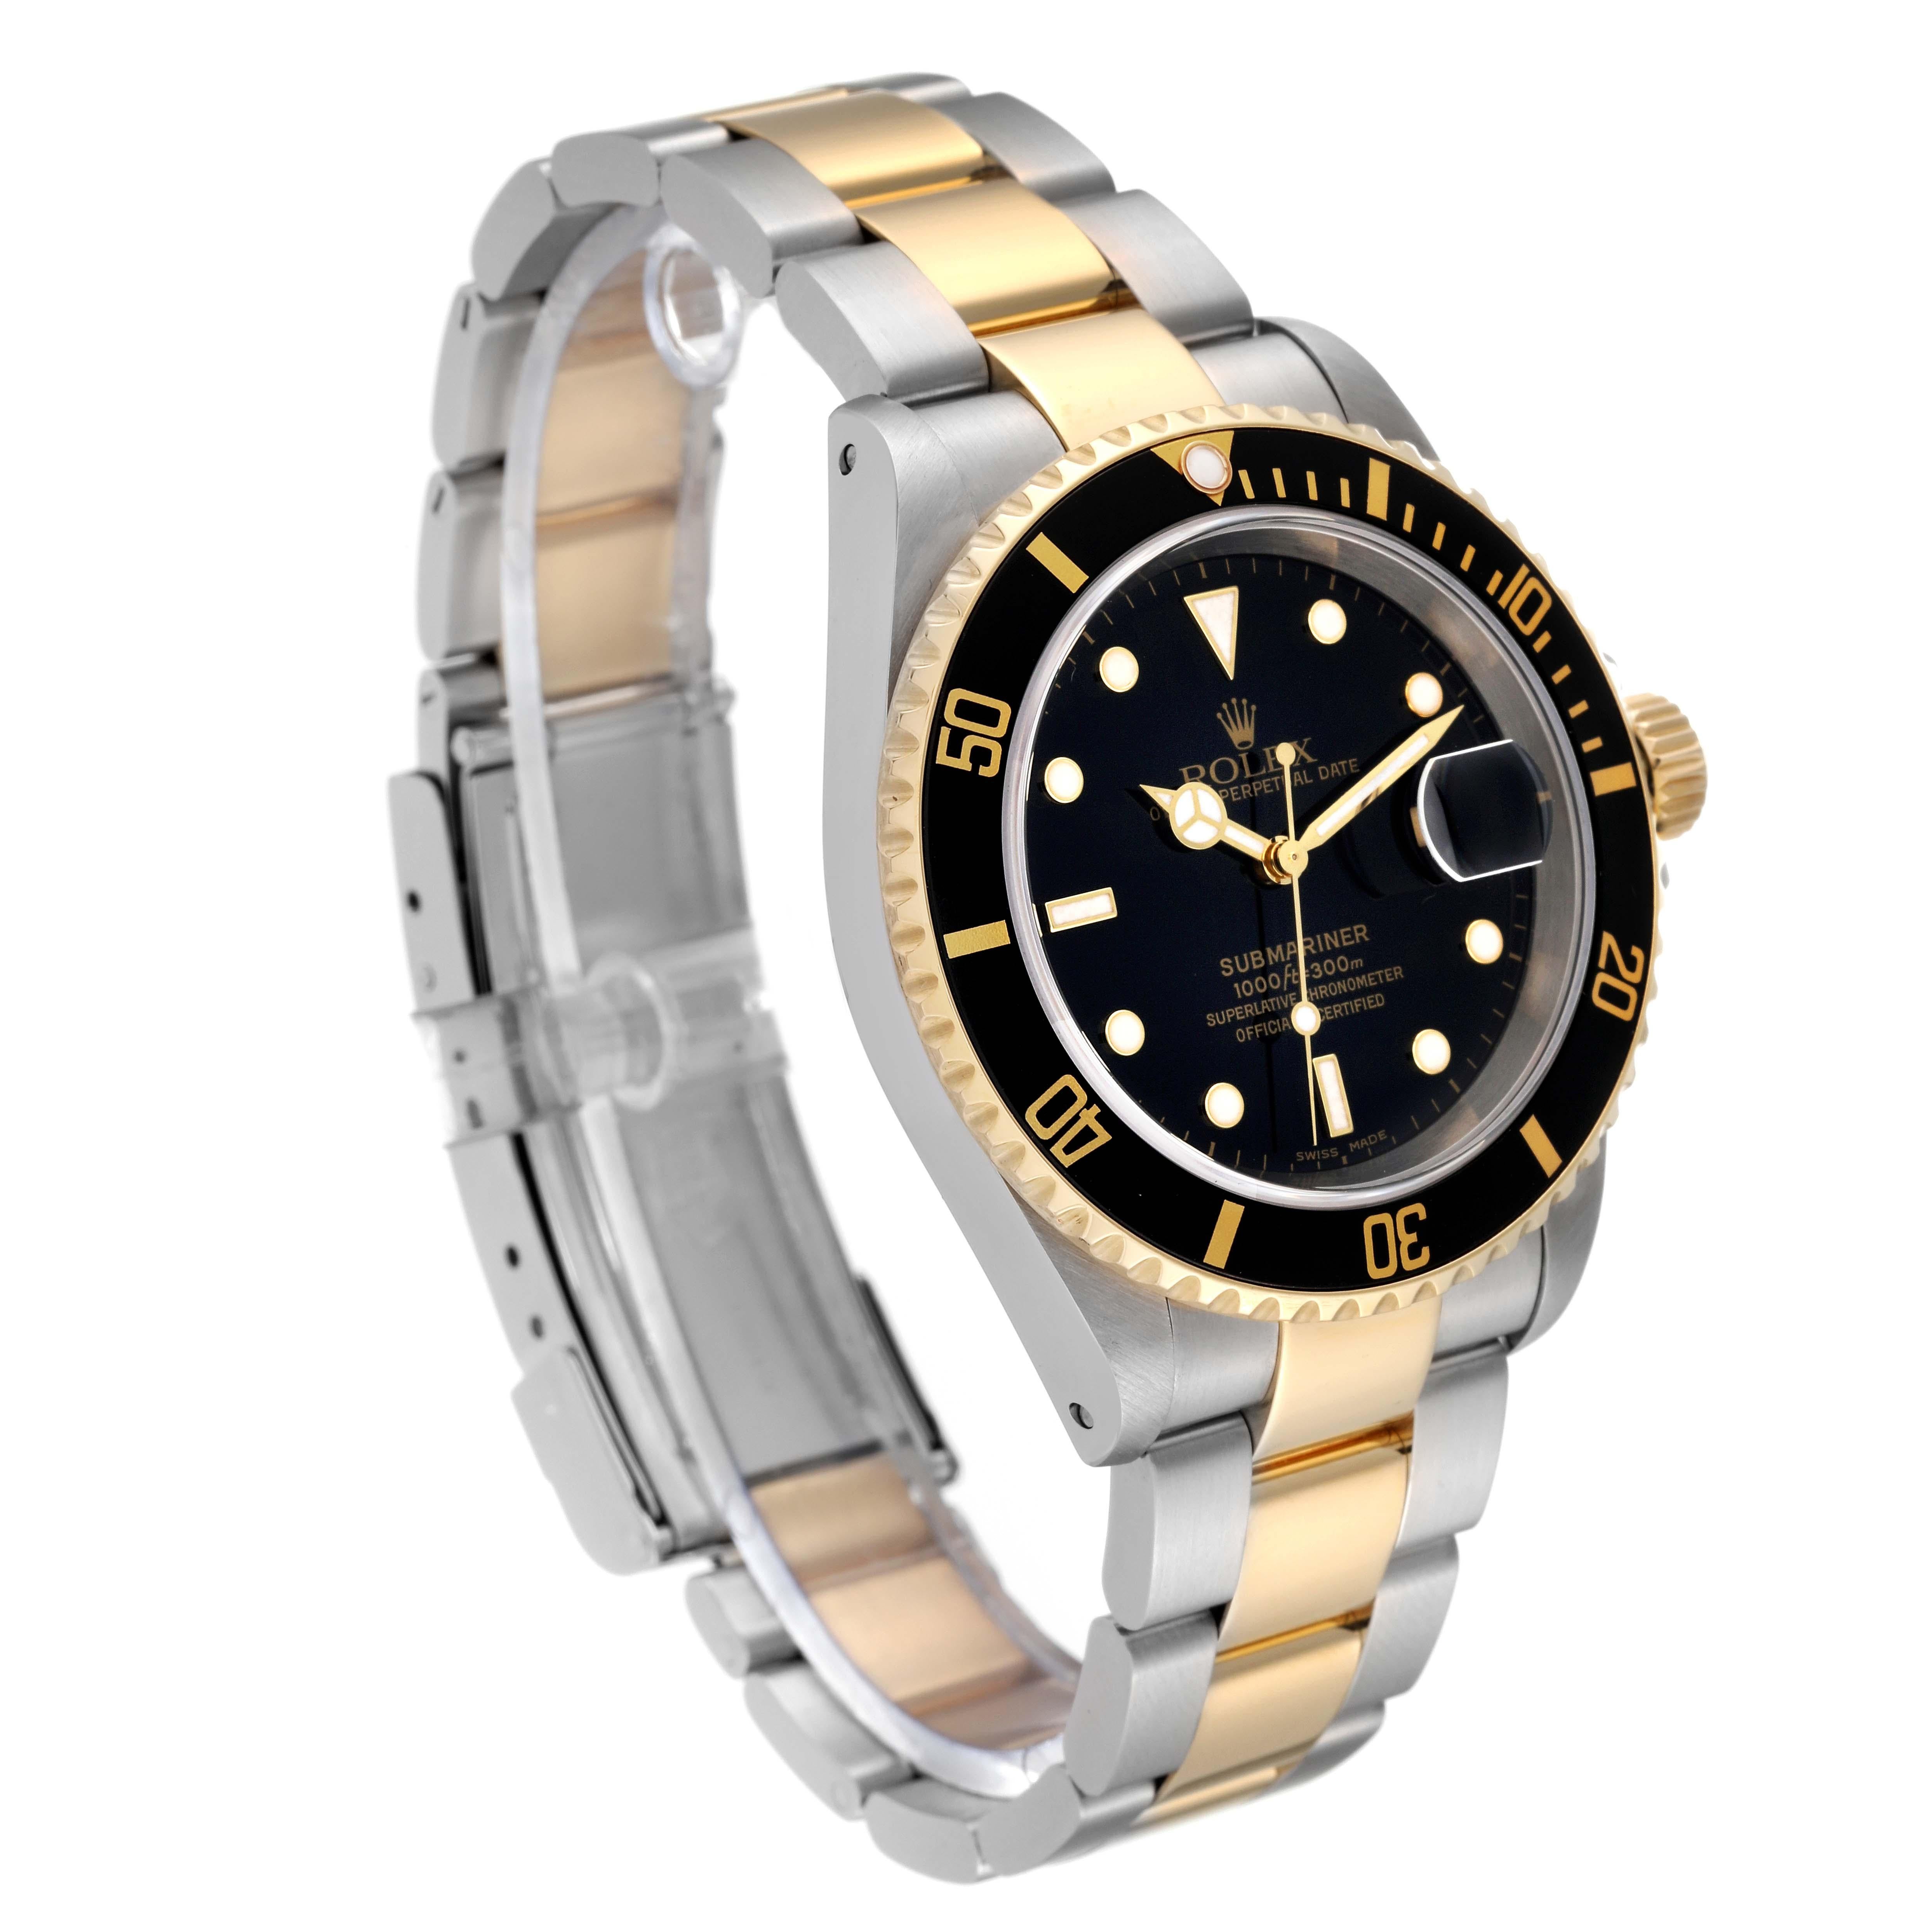 Rolex Submariner Steel Yellow Gold Black Dial Mens Watch 16613 Box Papers 4